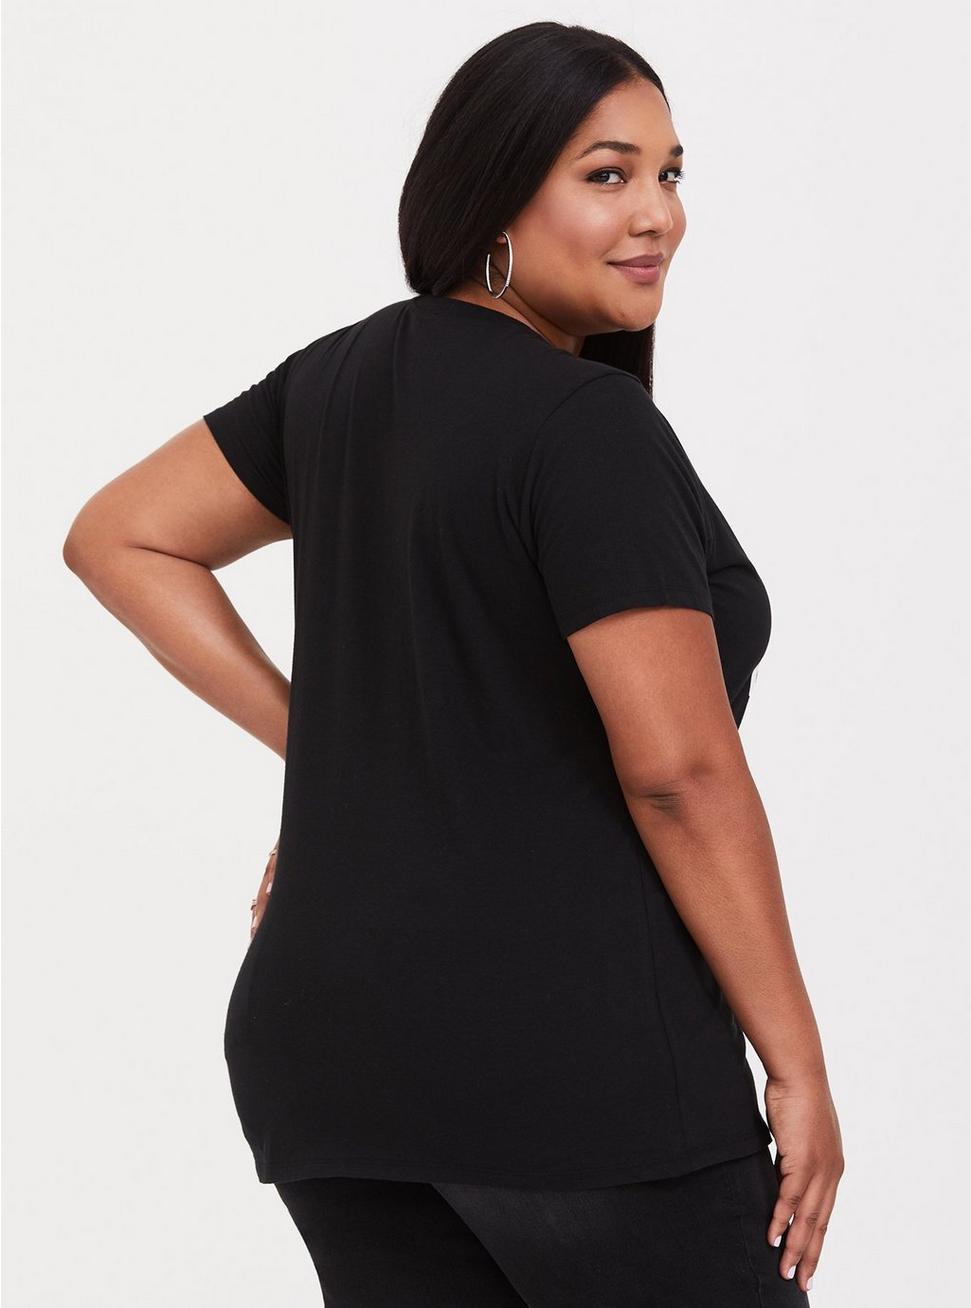 Plus Size - Black Red Hot Chili Peppers Tee - Torrid